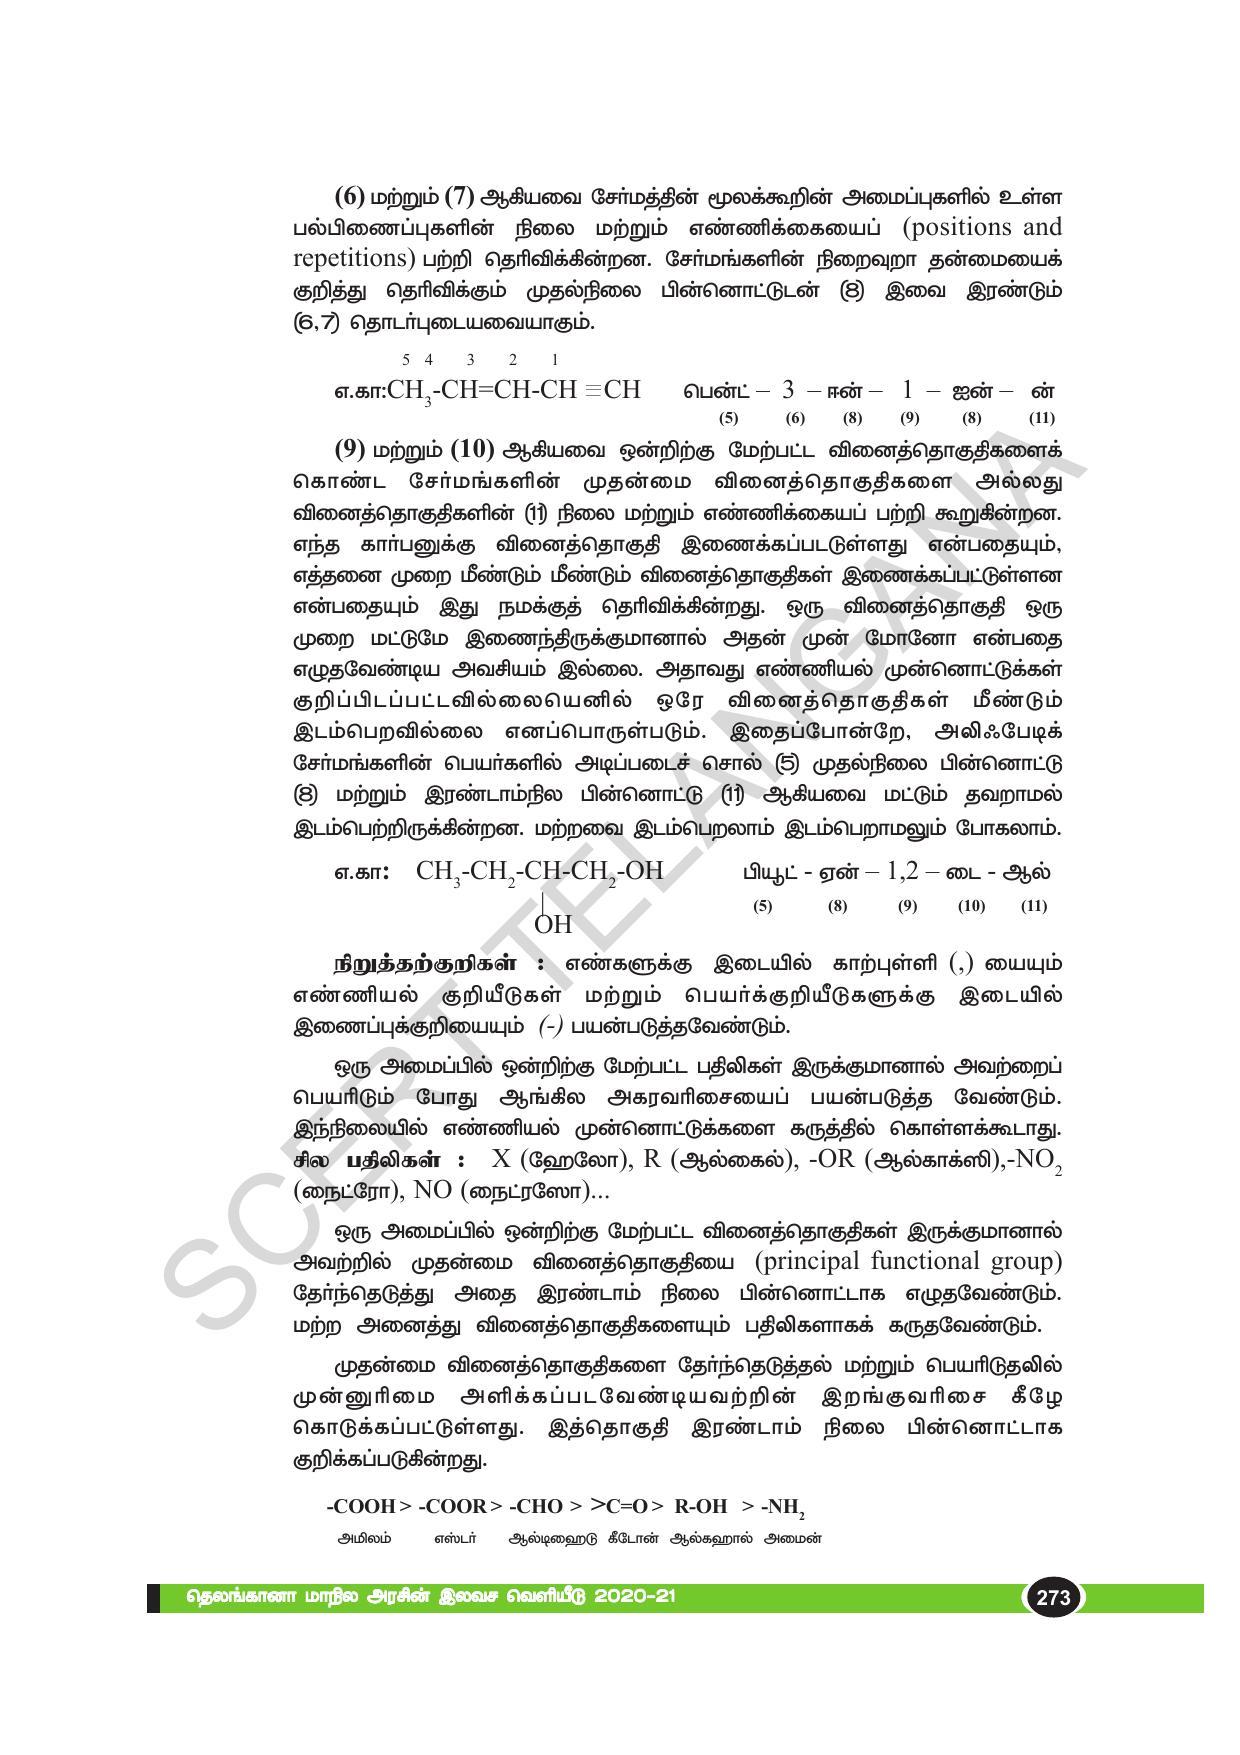 TS SCERT Class 10 Physical Science(Tamil Medium) Text Book - Page 285